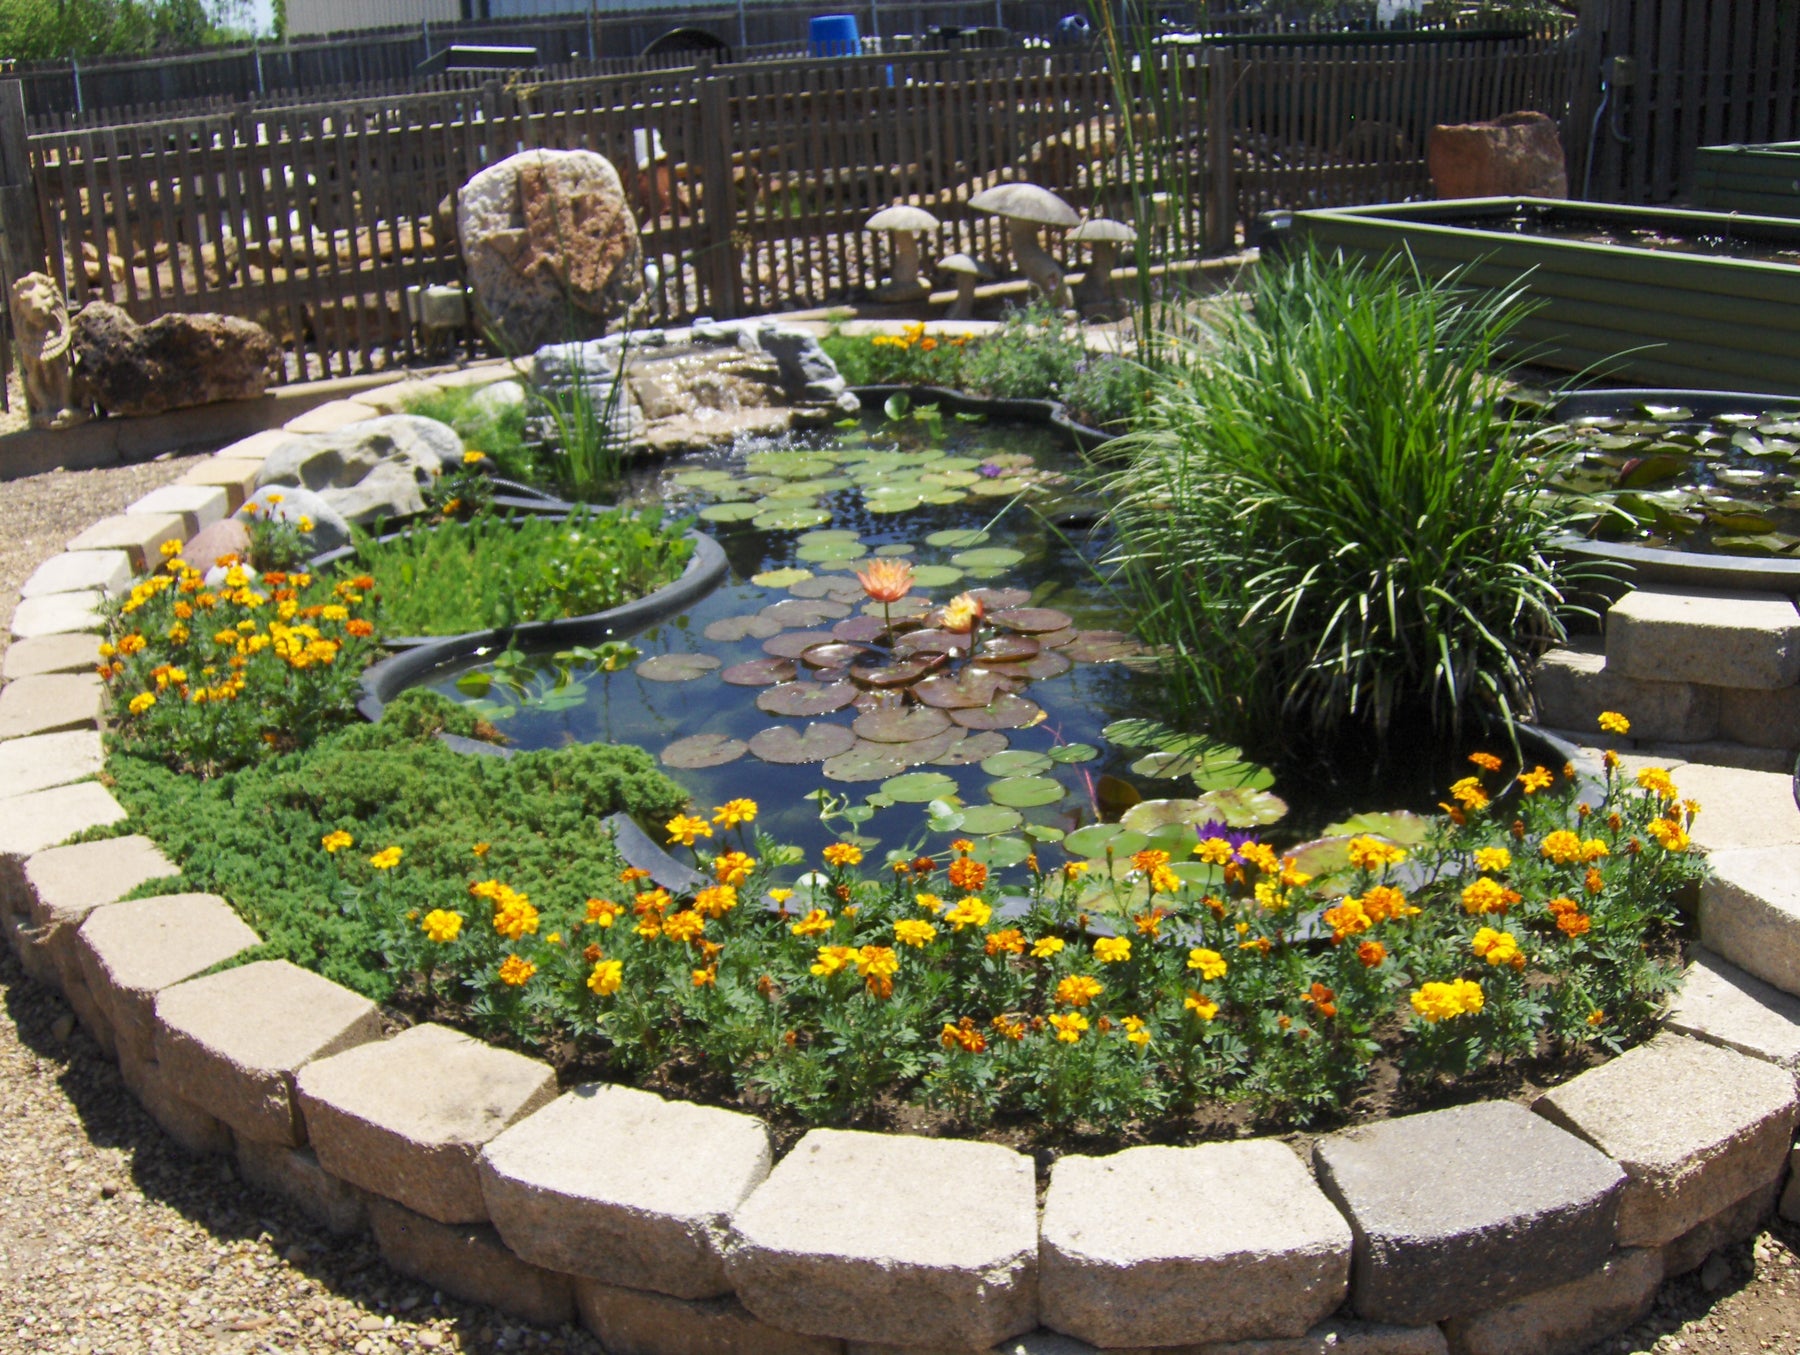 Texas-Sized Tips: Early Summer Pond Care for a Sparkling Season